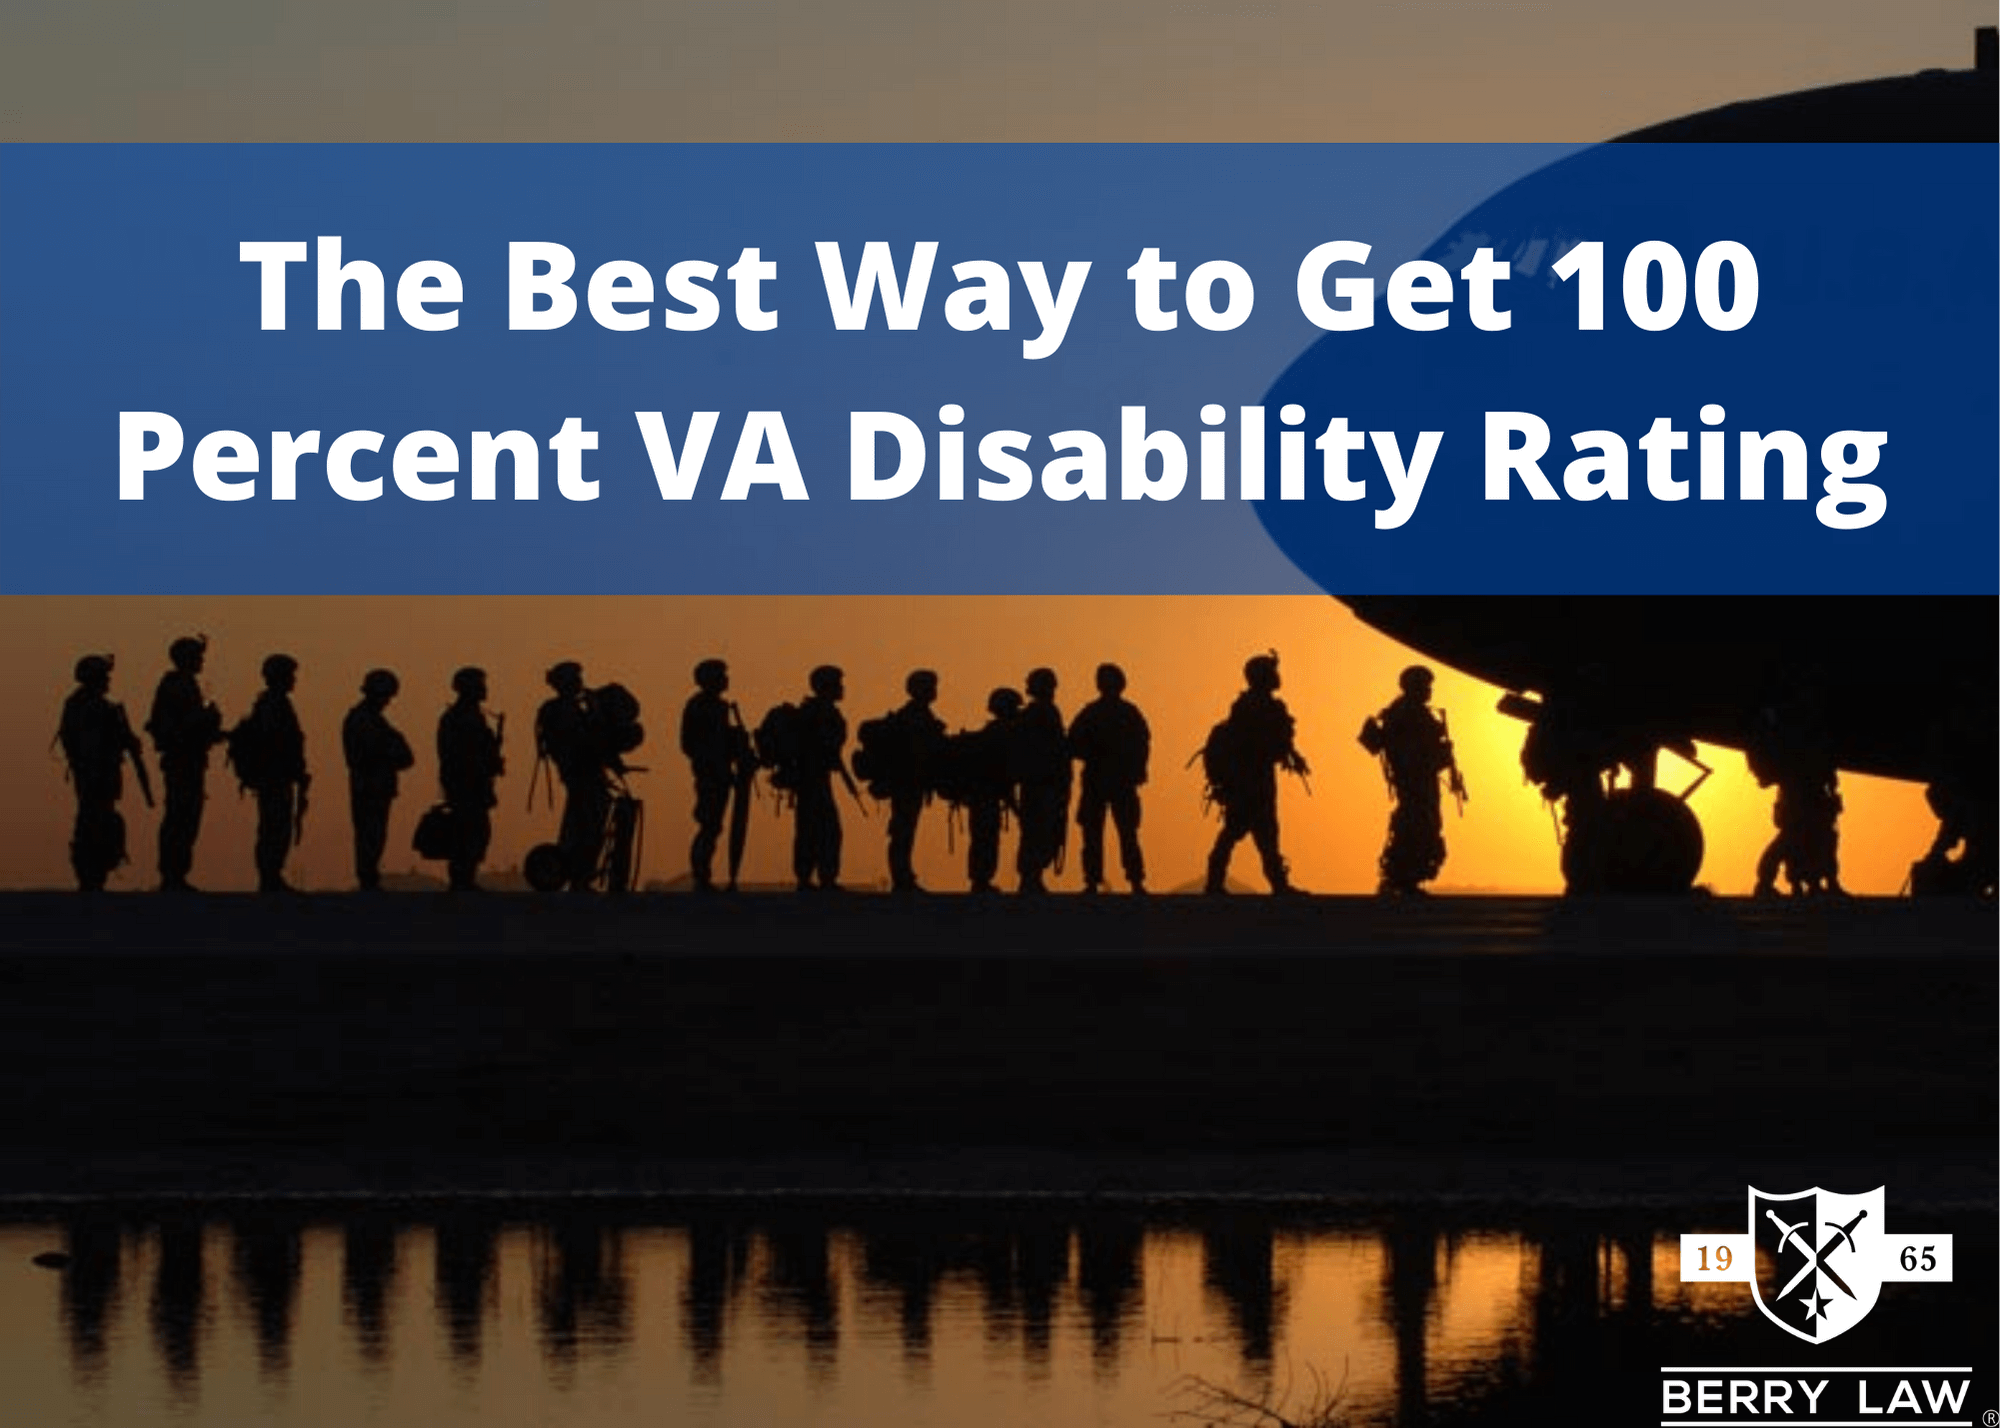 The Best Way to Get 100 Percent VA Disability Rating